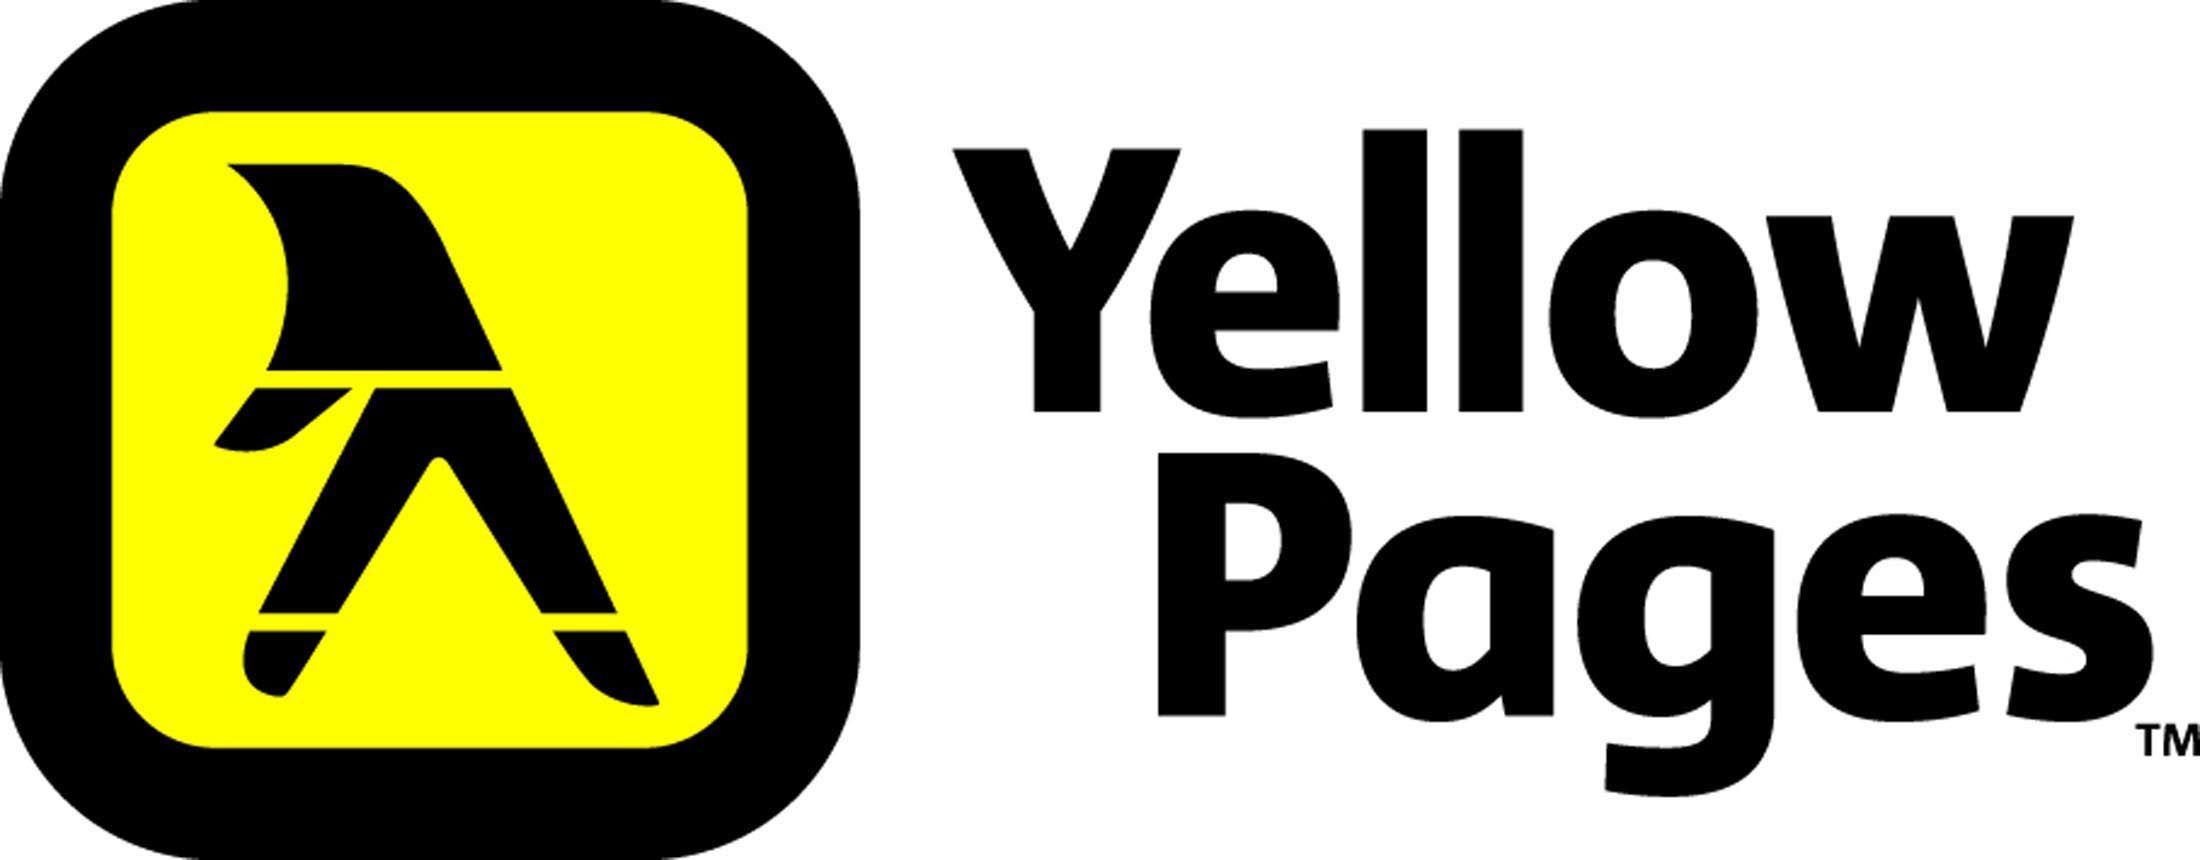 Yellow Pages New Logo - Yellow Pages Co. Logo | About of logos